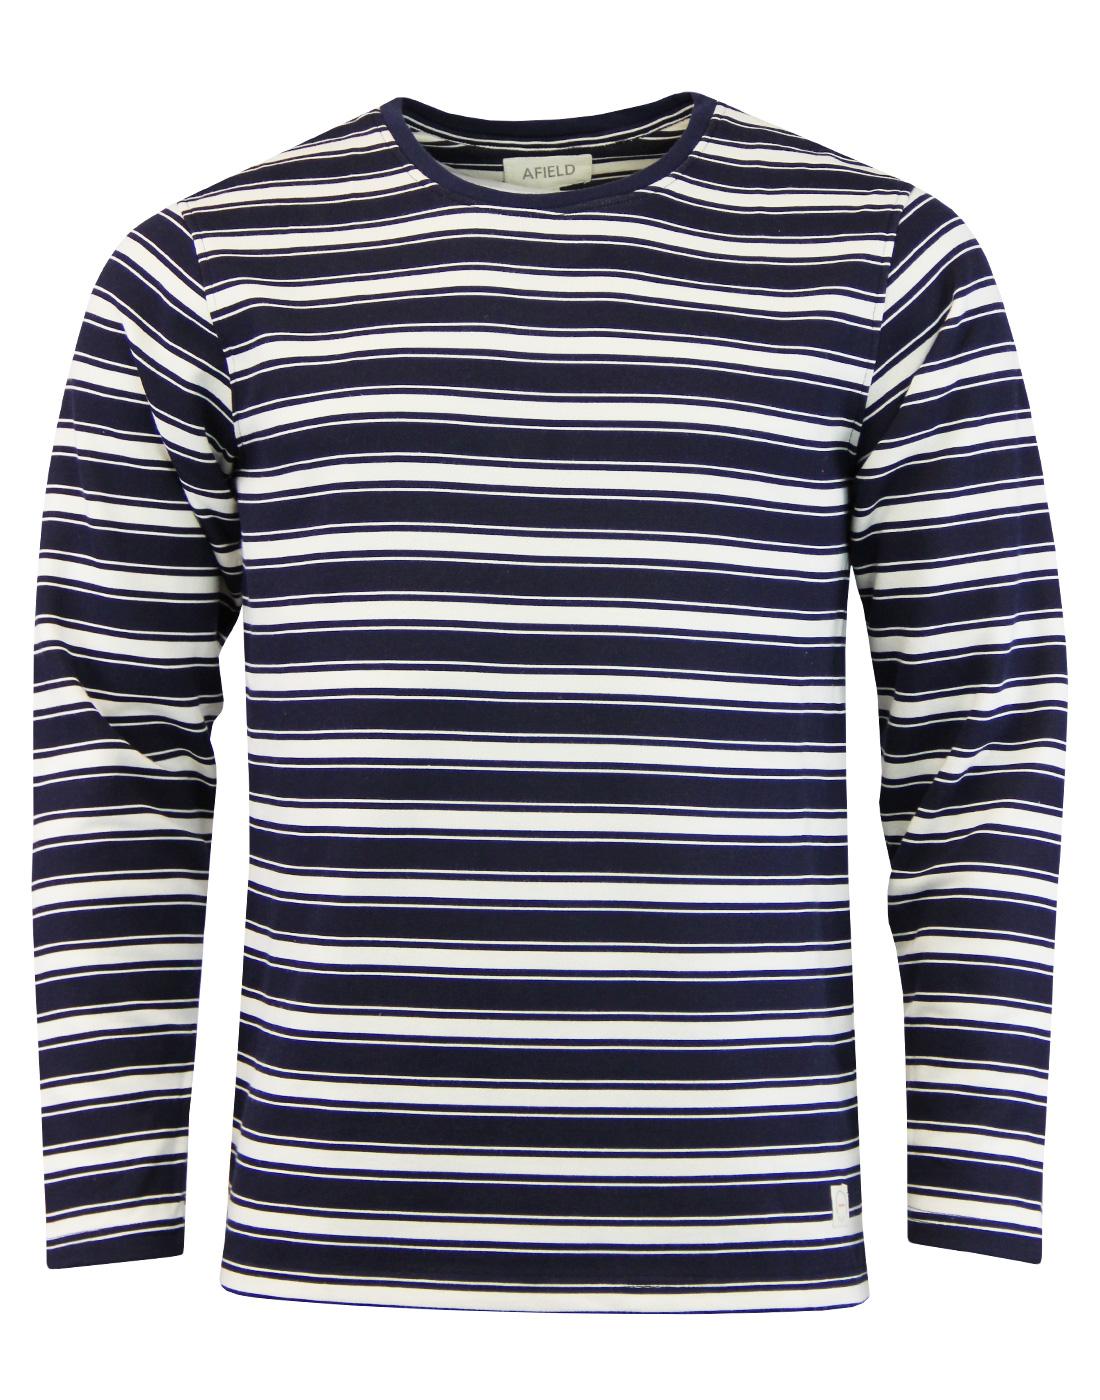 AFIELD Mens Retro 60s Mod French Terry Stripe Long Sleeve T-Shirt